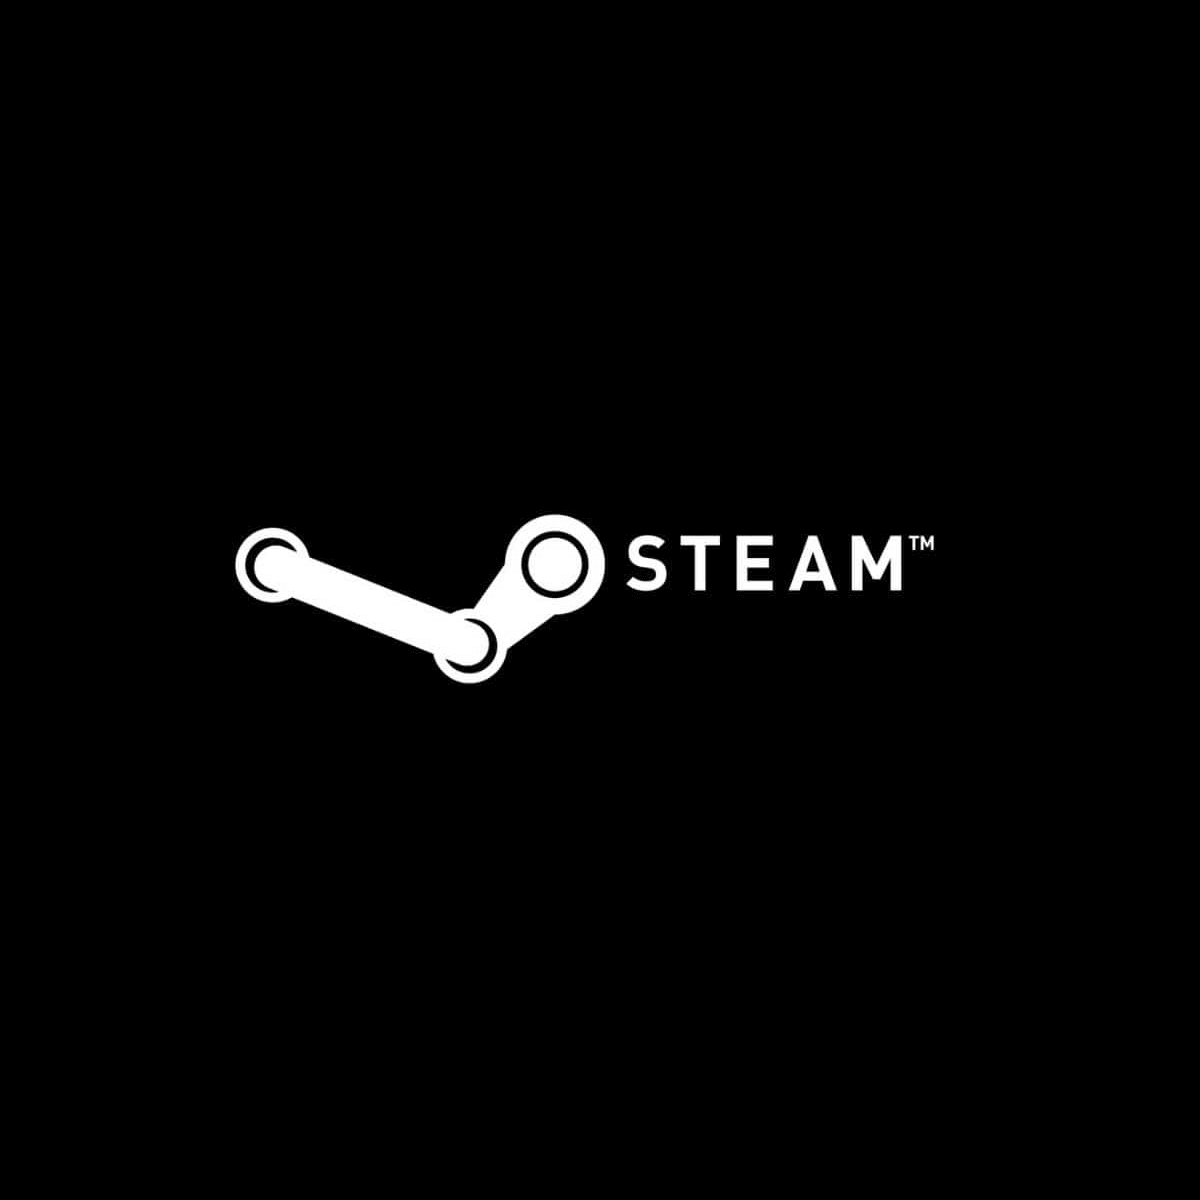 Recover Steam password with these simple steps